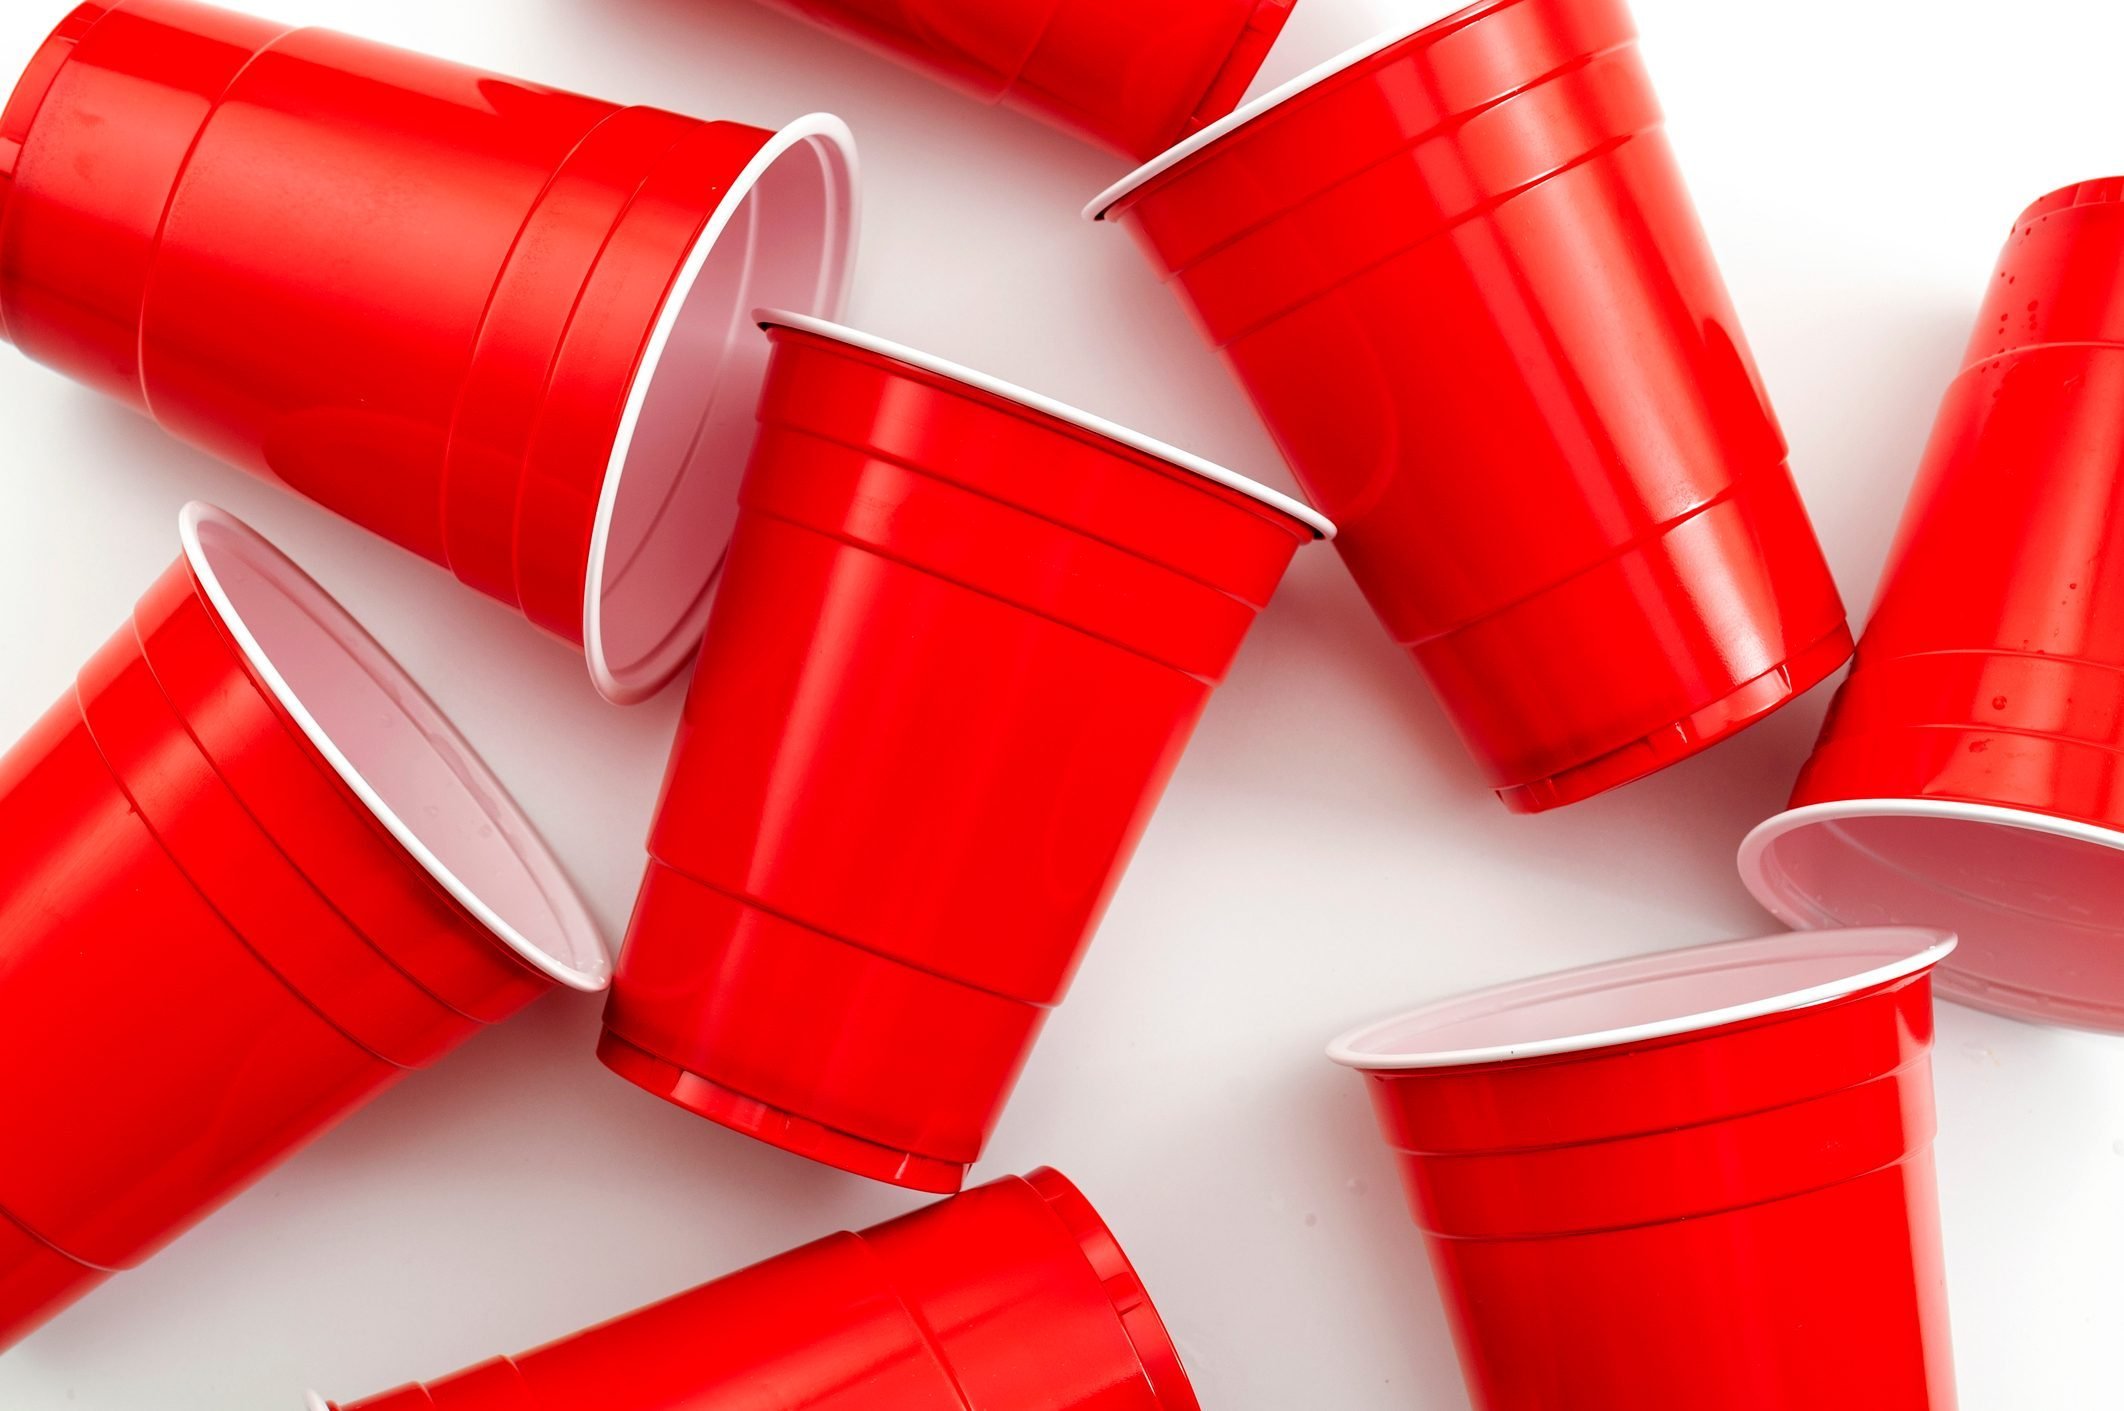 What Is The Real Reason For Lines On A Solo Cup? They Aren’t For Measuring Booze!